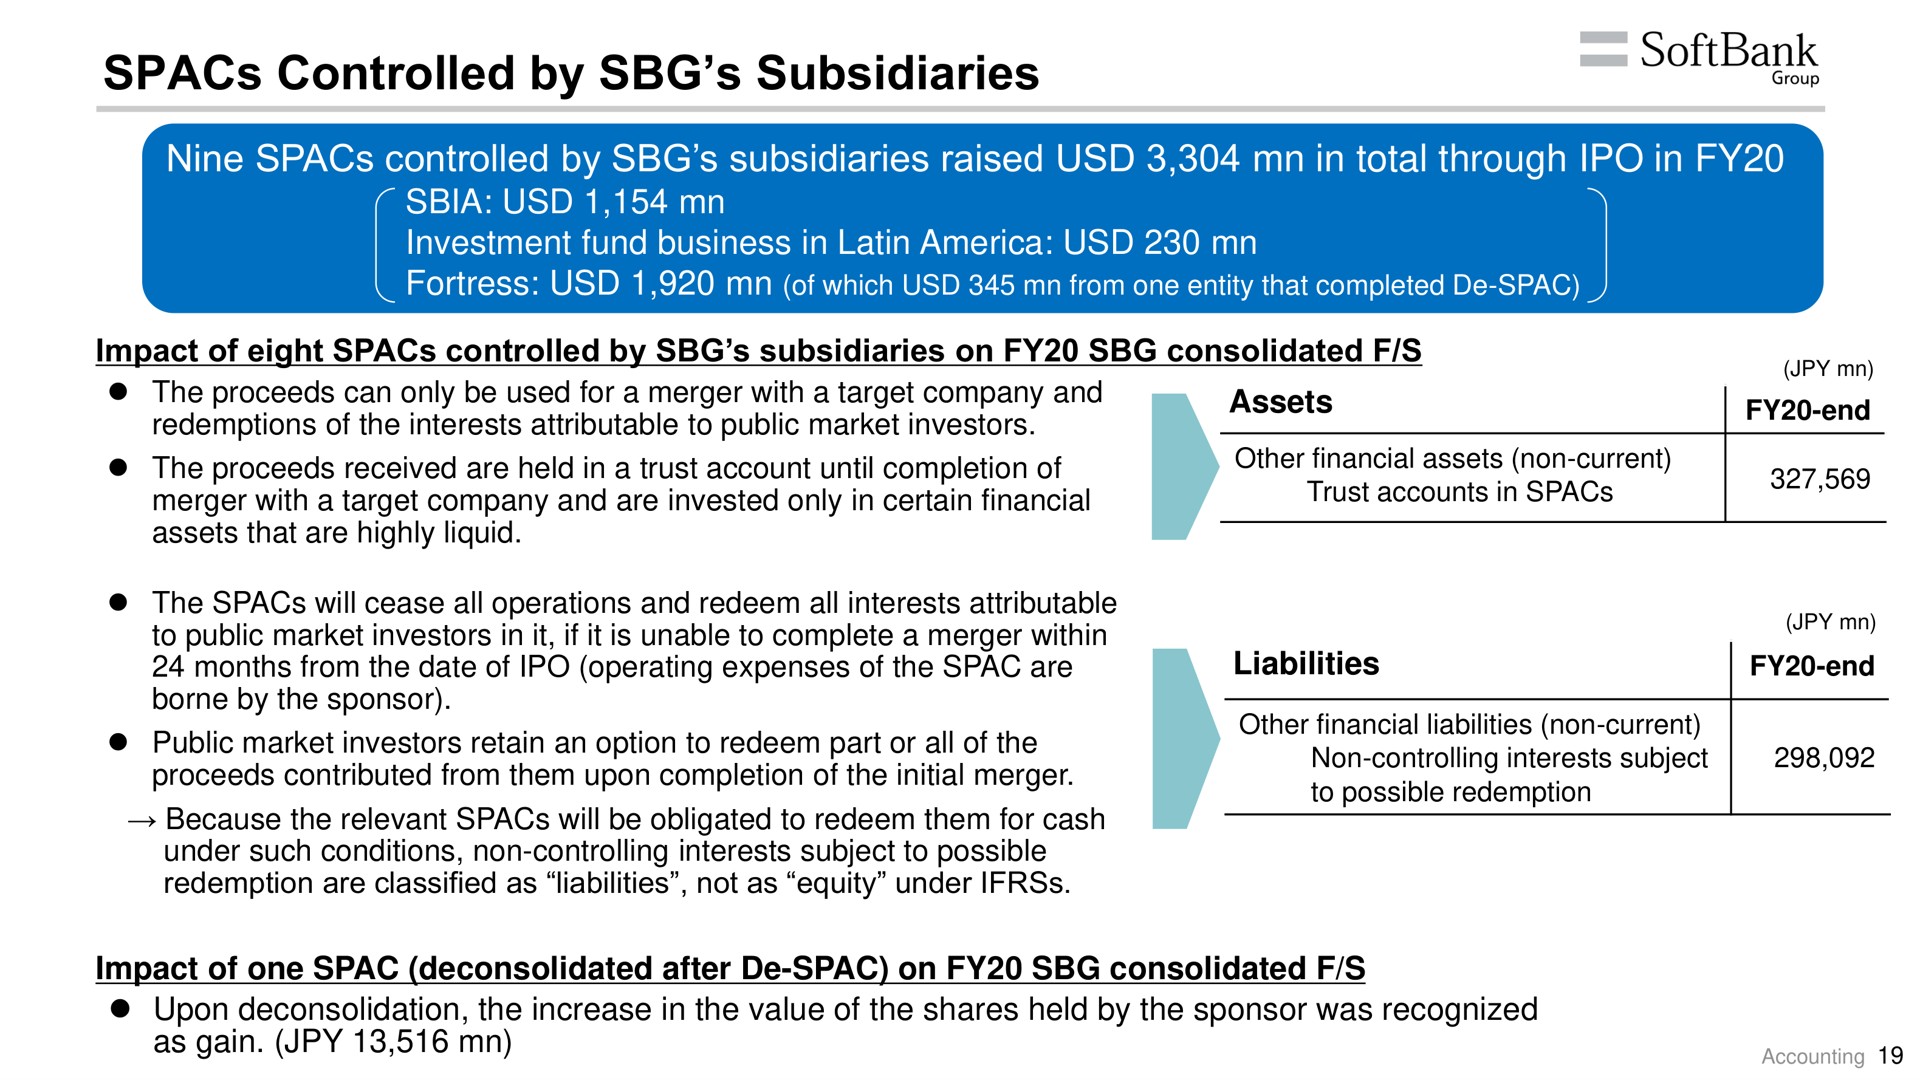 controlled by subsidiaries | SoftBank